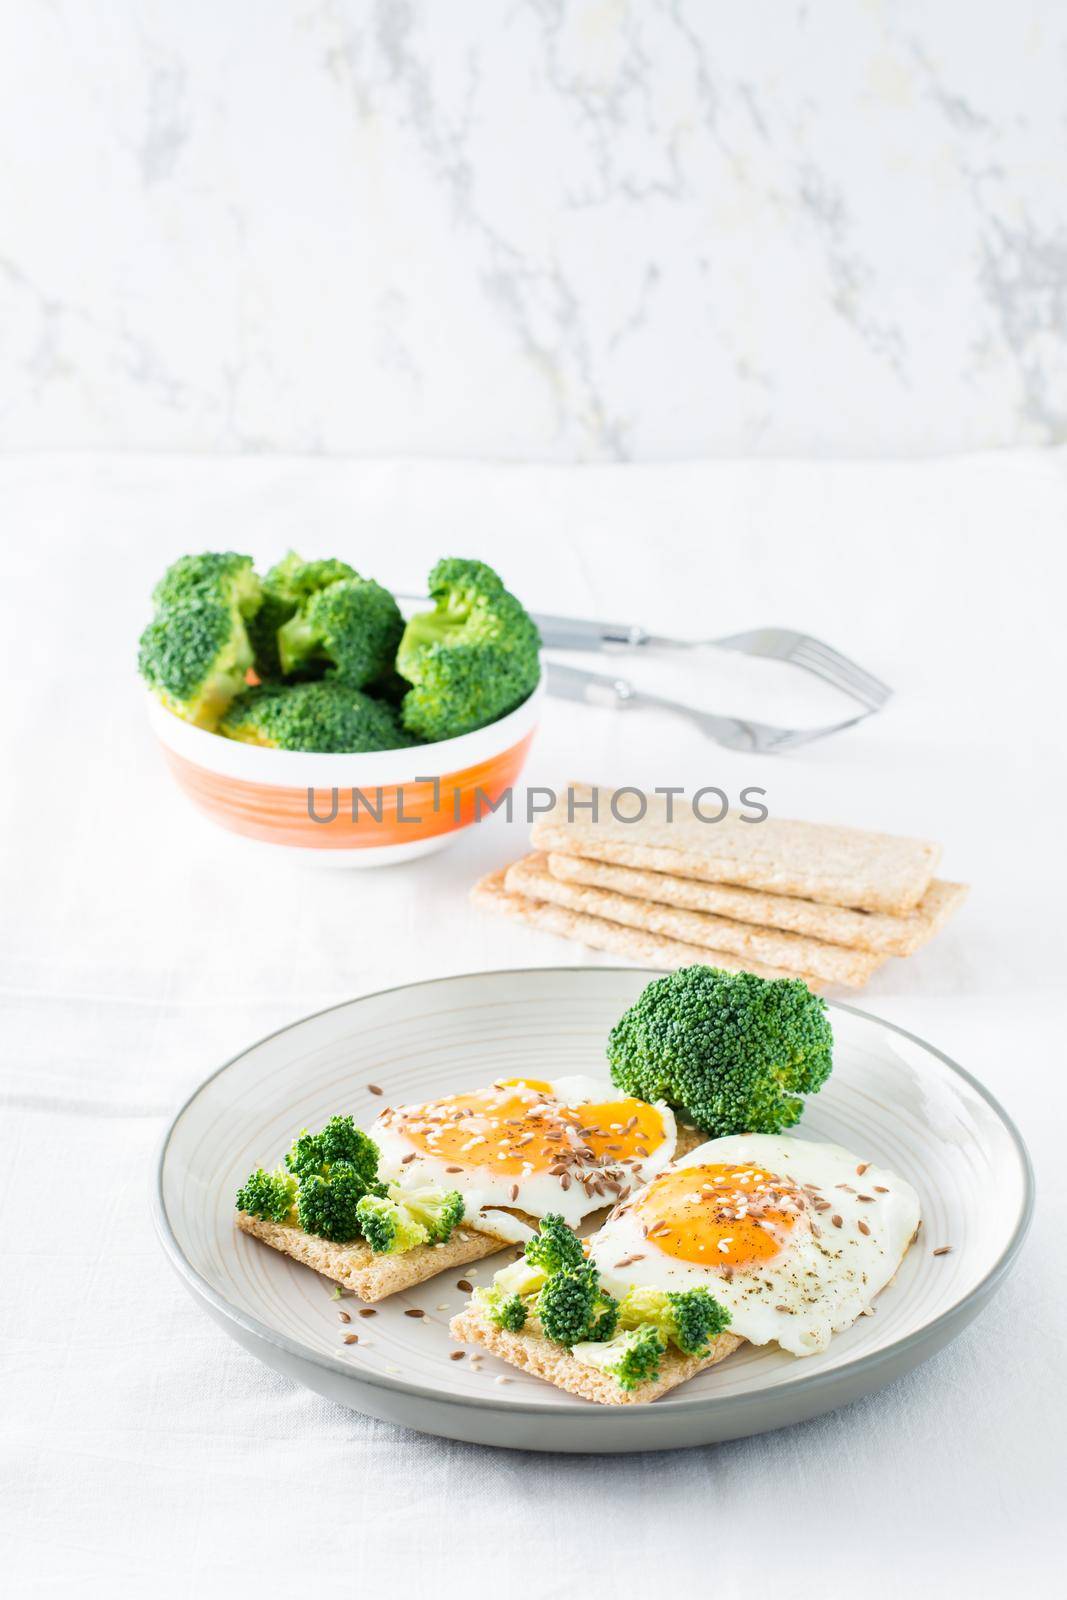 Bruschetta with scrambled eggs and broccoli on a grain crispbread with sesame seeds and flaxseed on a plate and a bowl of broccoli on the table. Vertical view